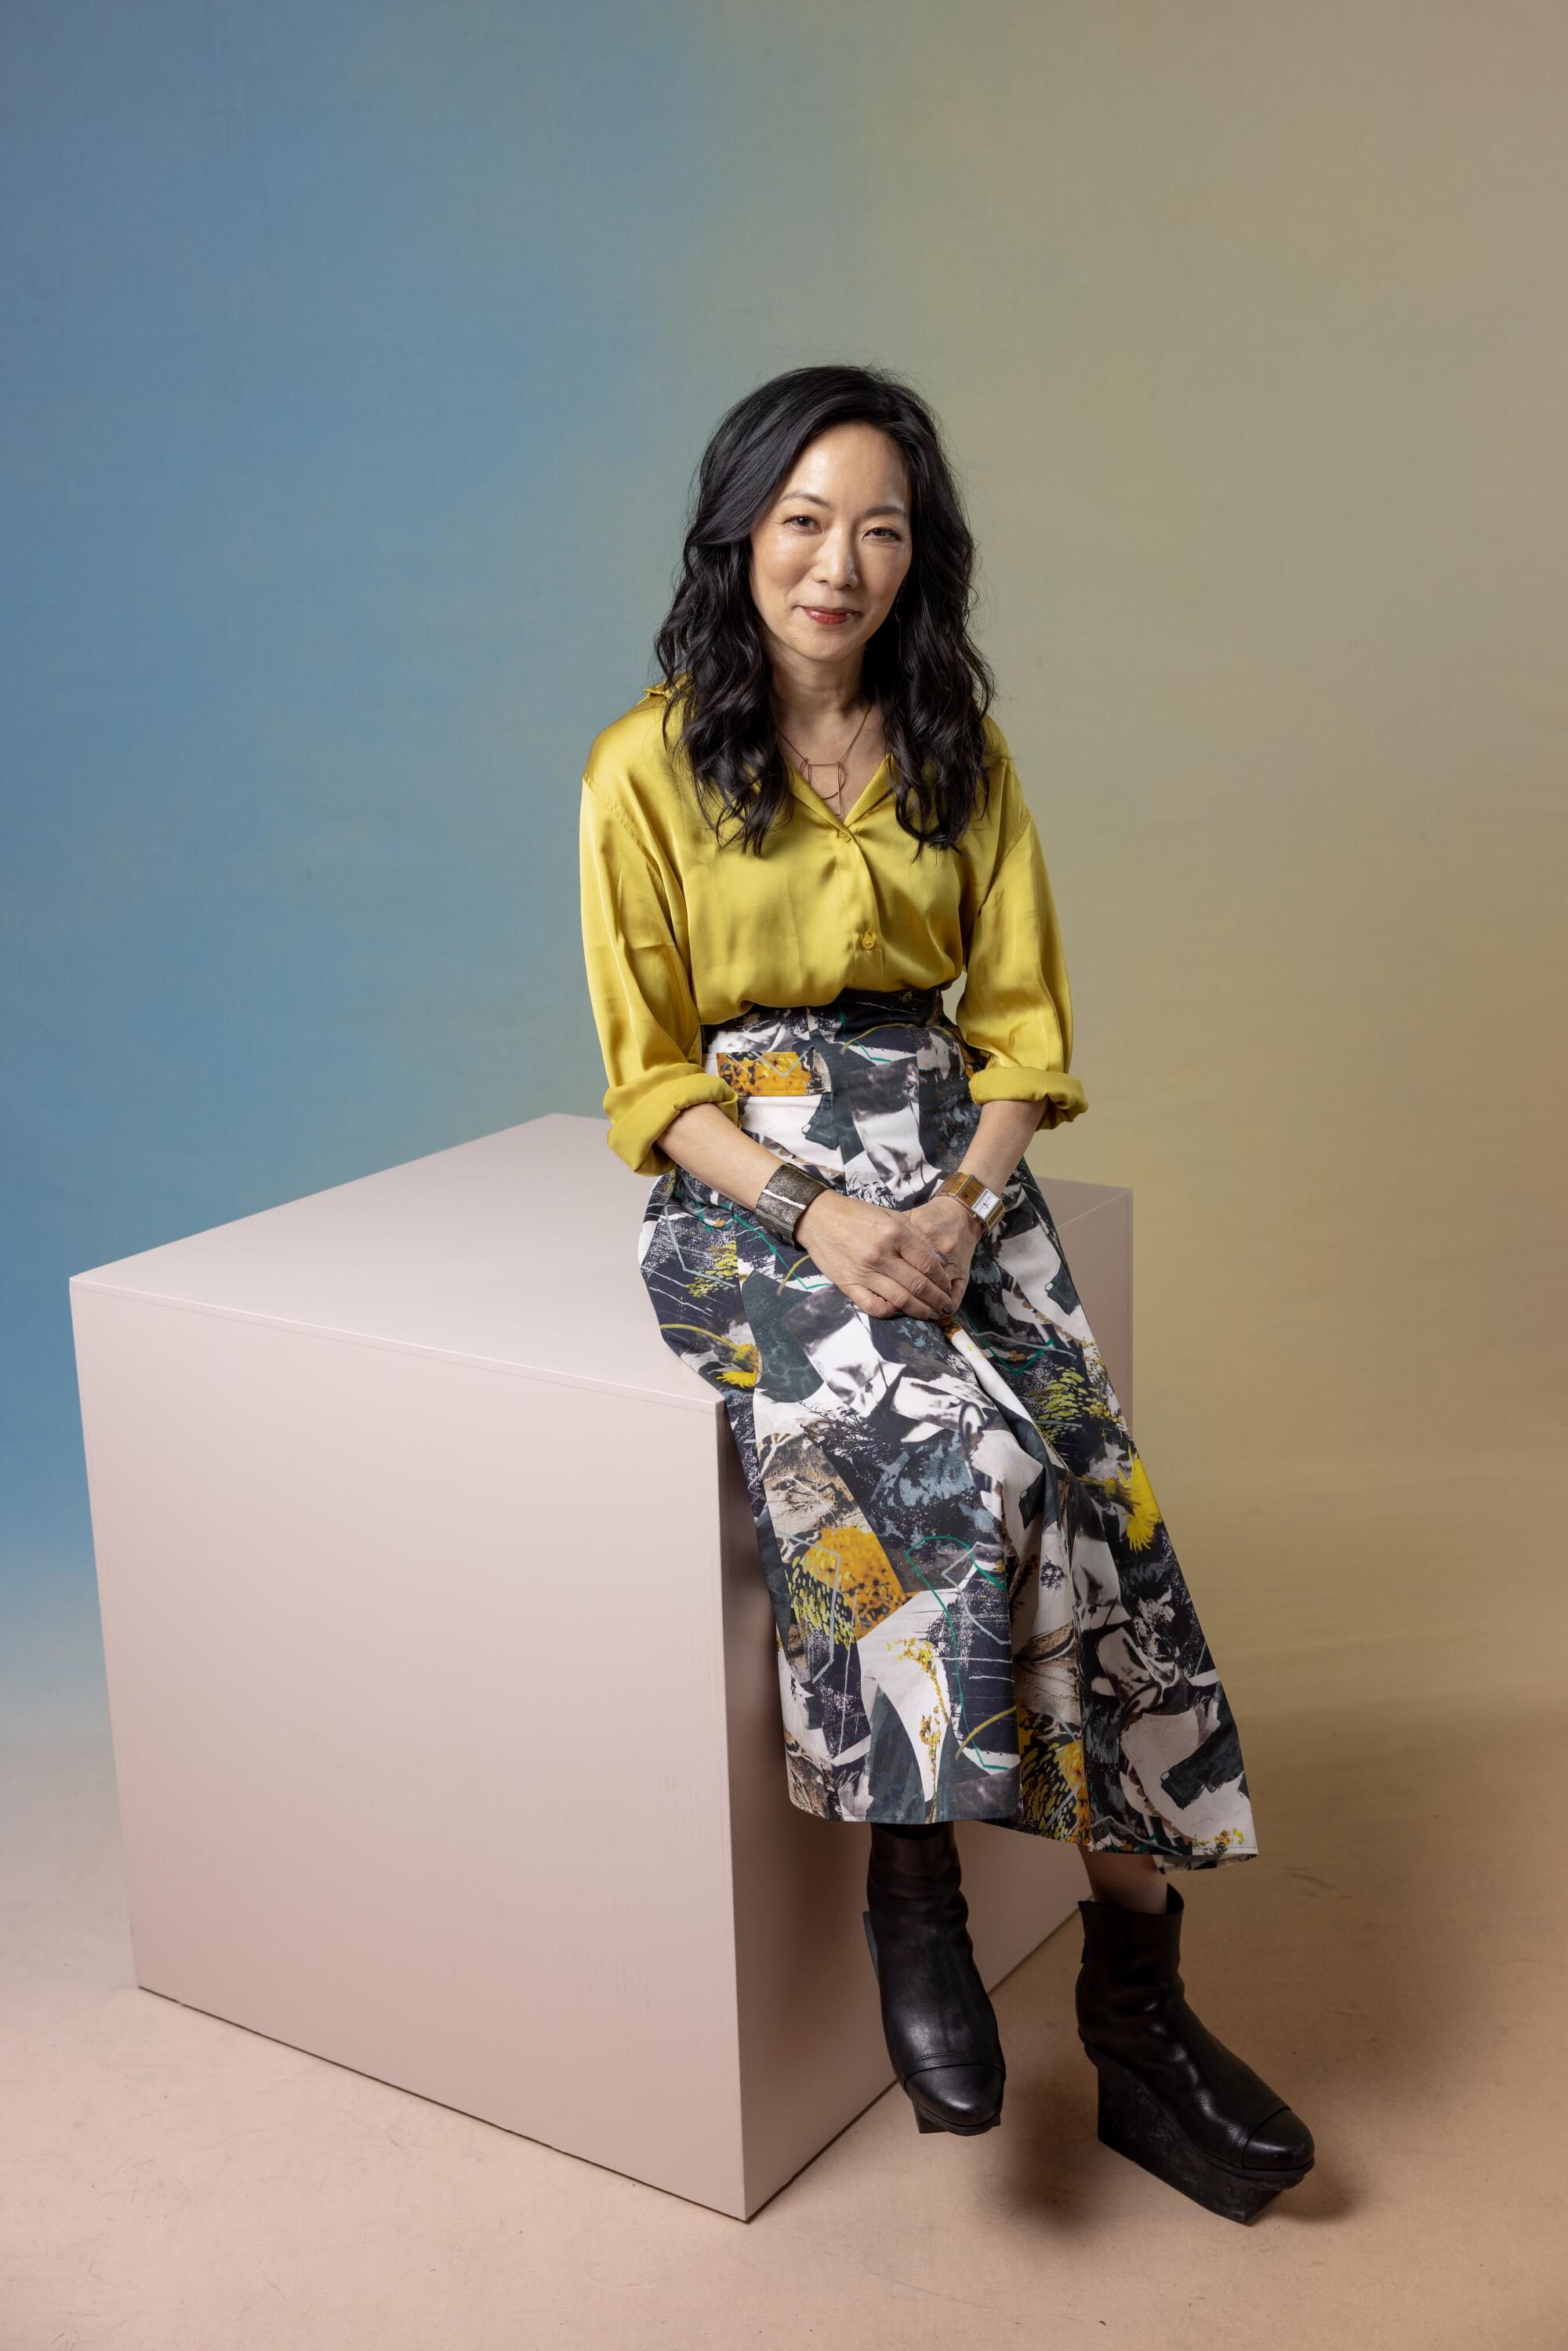 Jessica Yu smiles and wears a yellow top and patterned skirt while sitting on a cube.